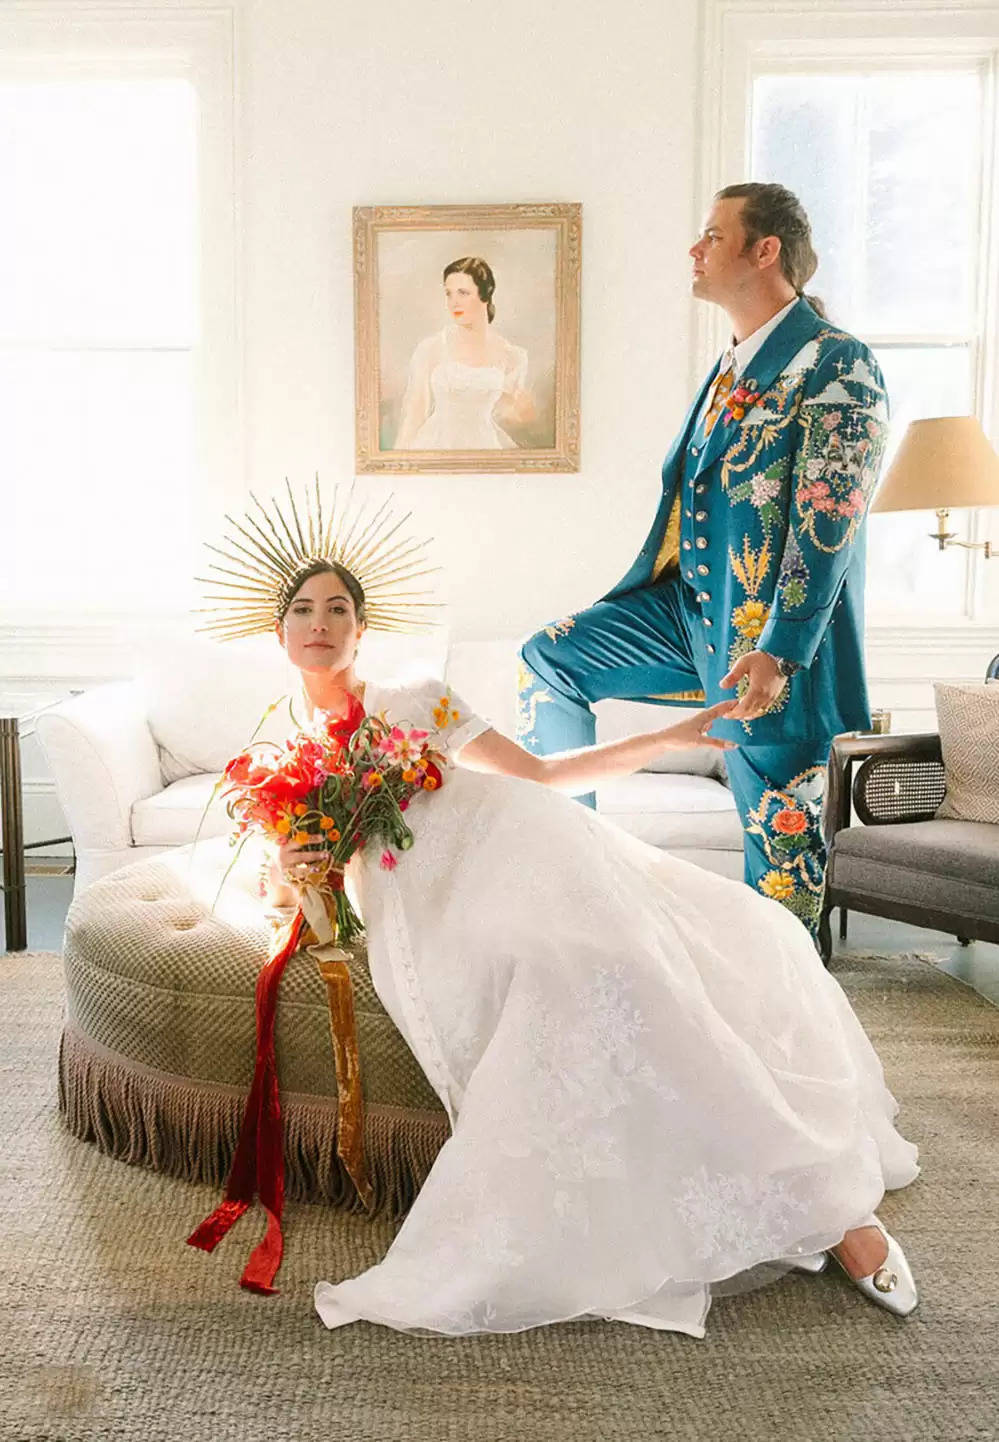 An Eclectic Pageant-Impressed Glamping Marriage ceremony on the California Coast